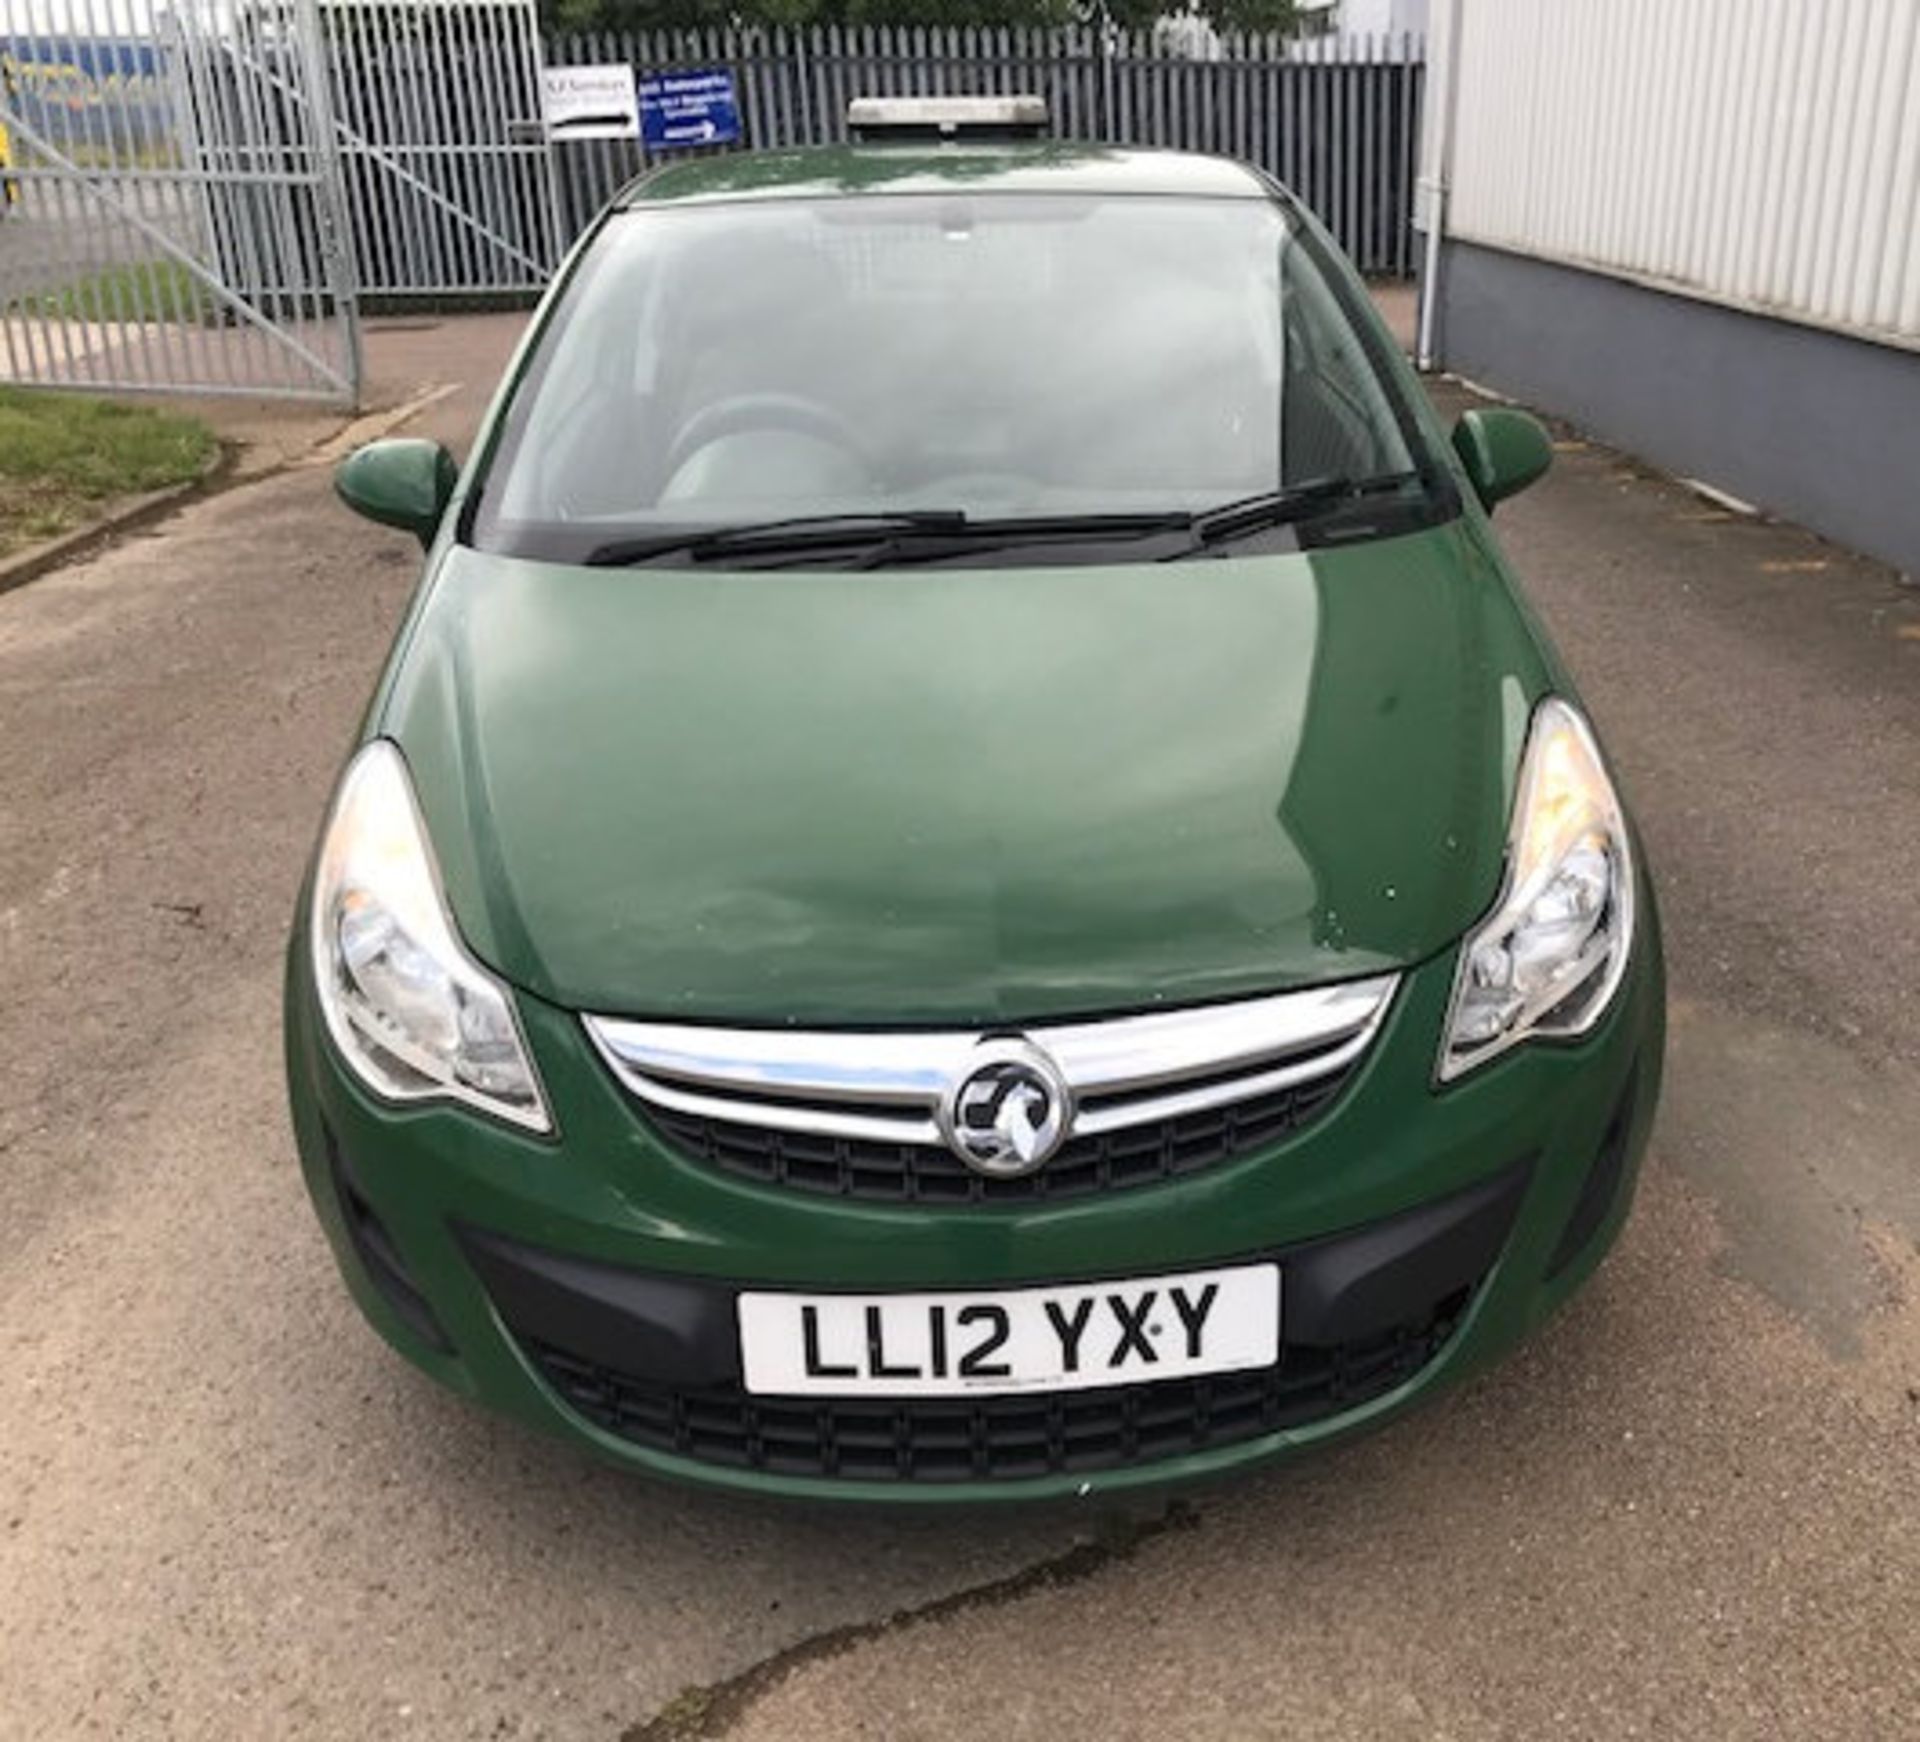 2012 Vauxhall Corsa 1.3 CDTI 3 Dr Panel Van - CL505 - Location: Corby, NorthamptonshireDescription - Image 5 of 11